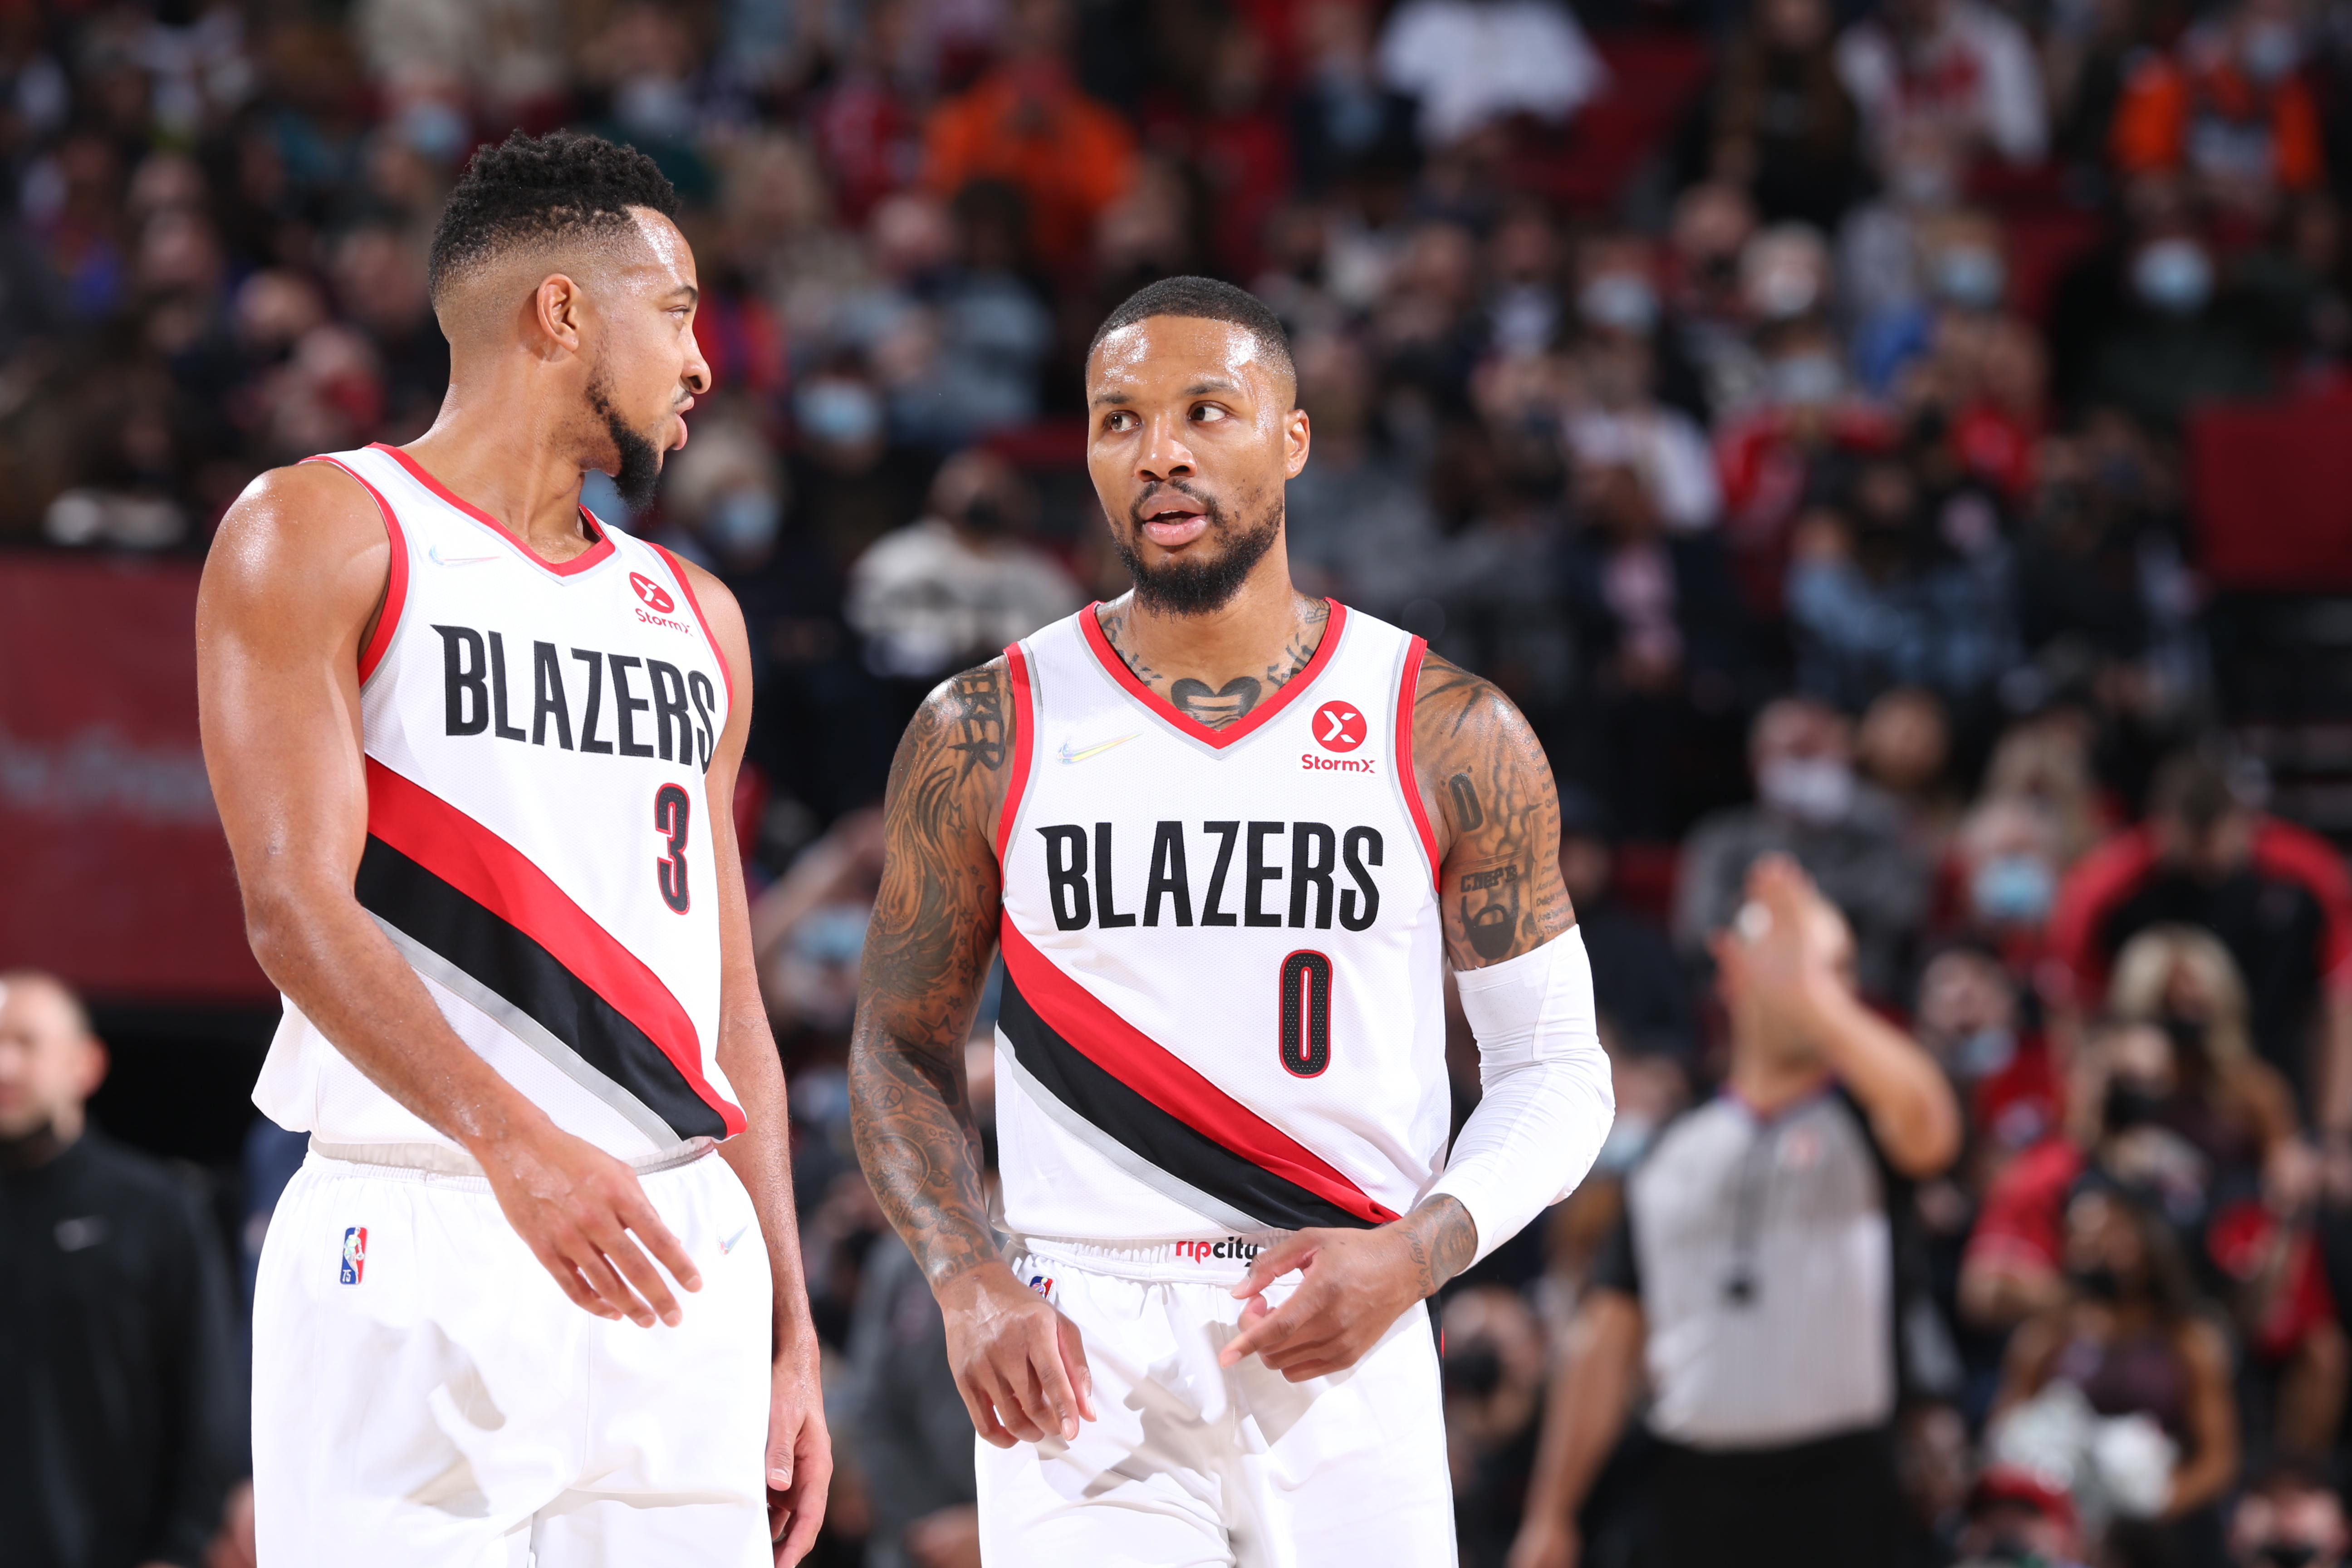 Report: CJ McCollum agrees to $100 million extension with Blazers